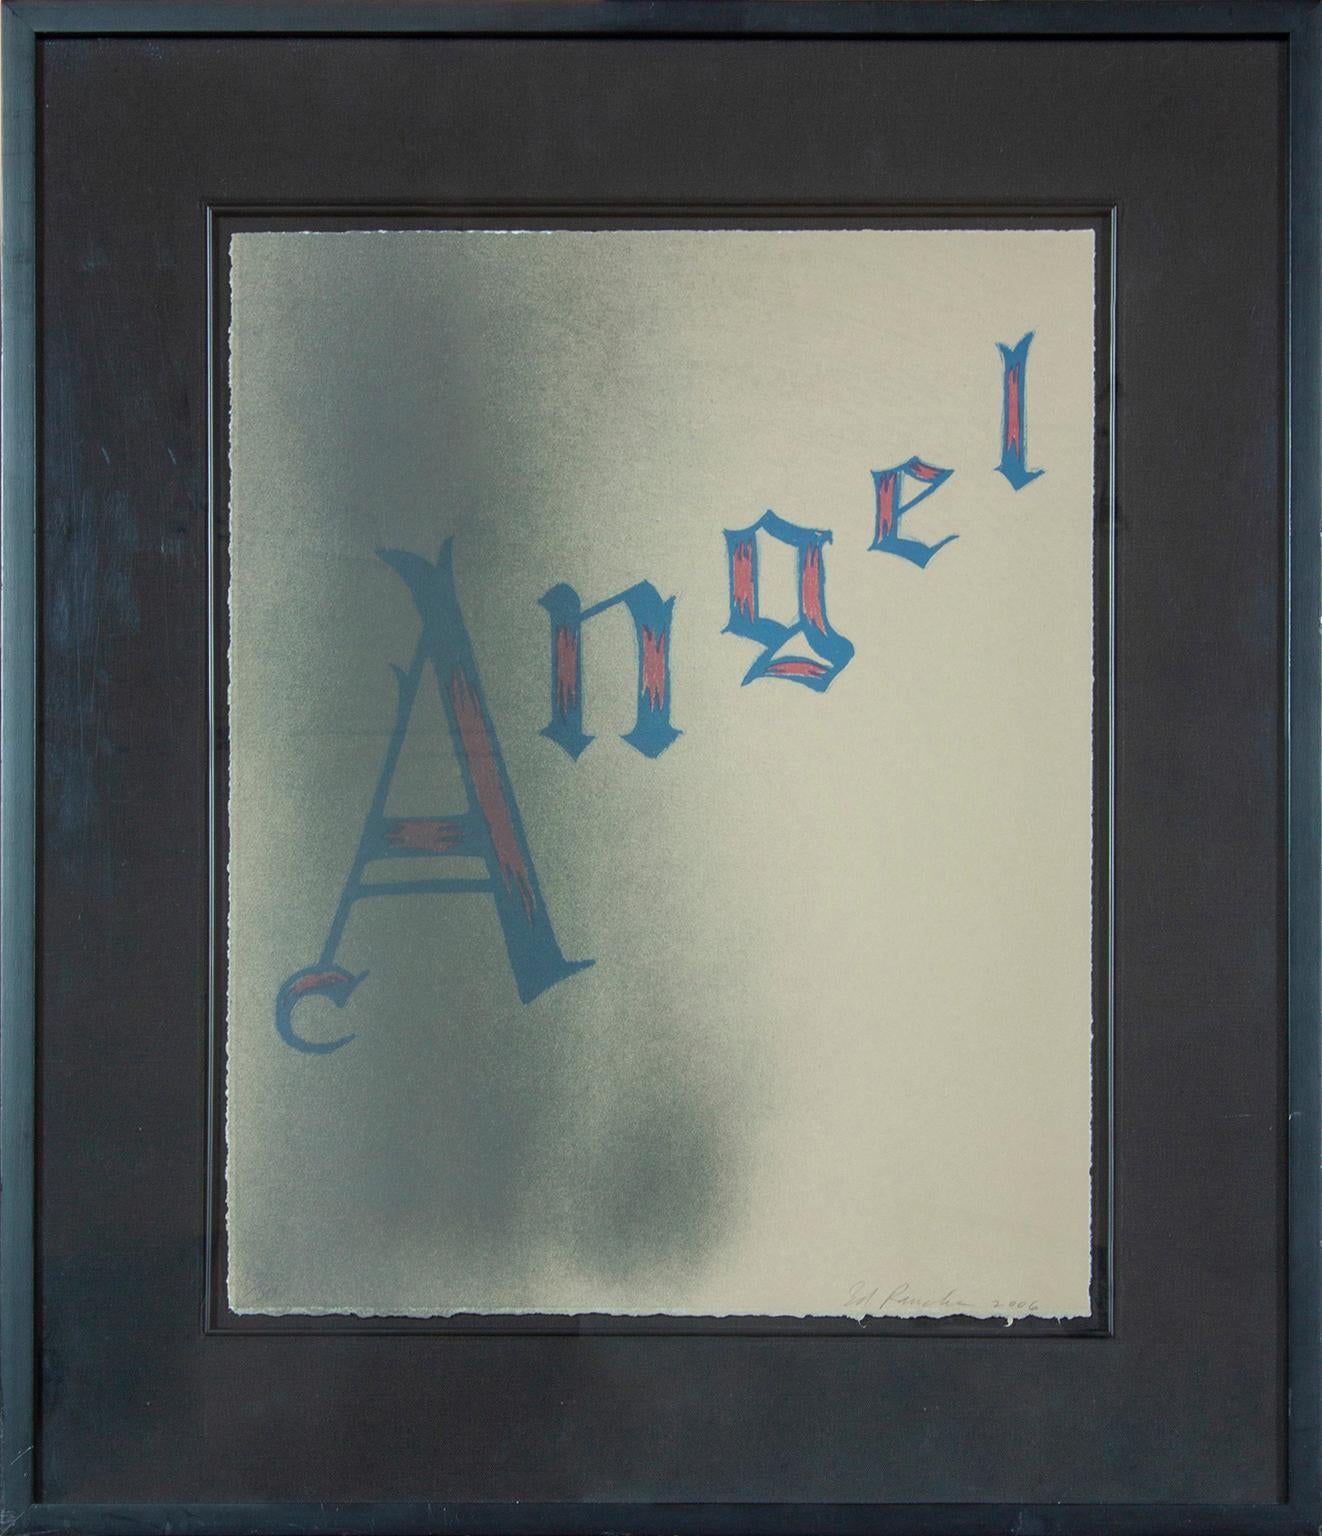 Ed Ruscha "Angel" signed lithograph on Rives BFK wove paper from edition of 50